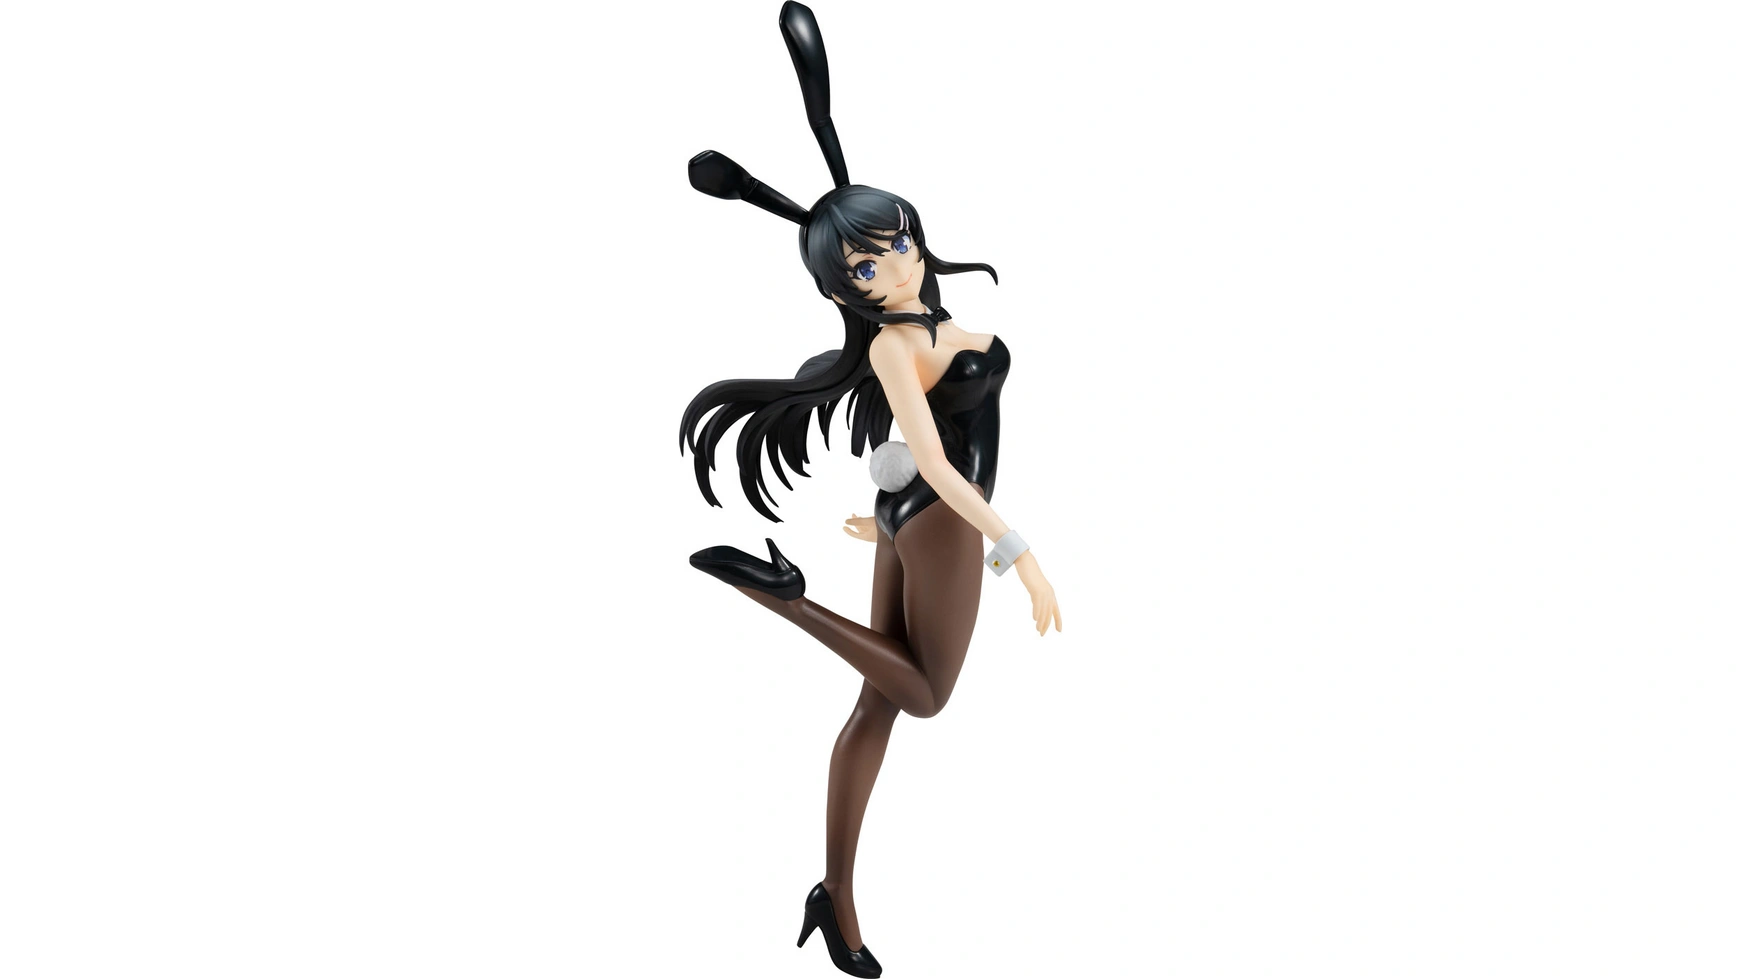 Rascal Does Not Dream Of Bunny Girl Senpai Pop Up Parade Статуя из ПВХ Май Сакурадзима 20 см 24cm anime rascal does not dream of bunny girl figure sakurajima mai pvc action figure toys collectible model toys kid gift